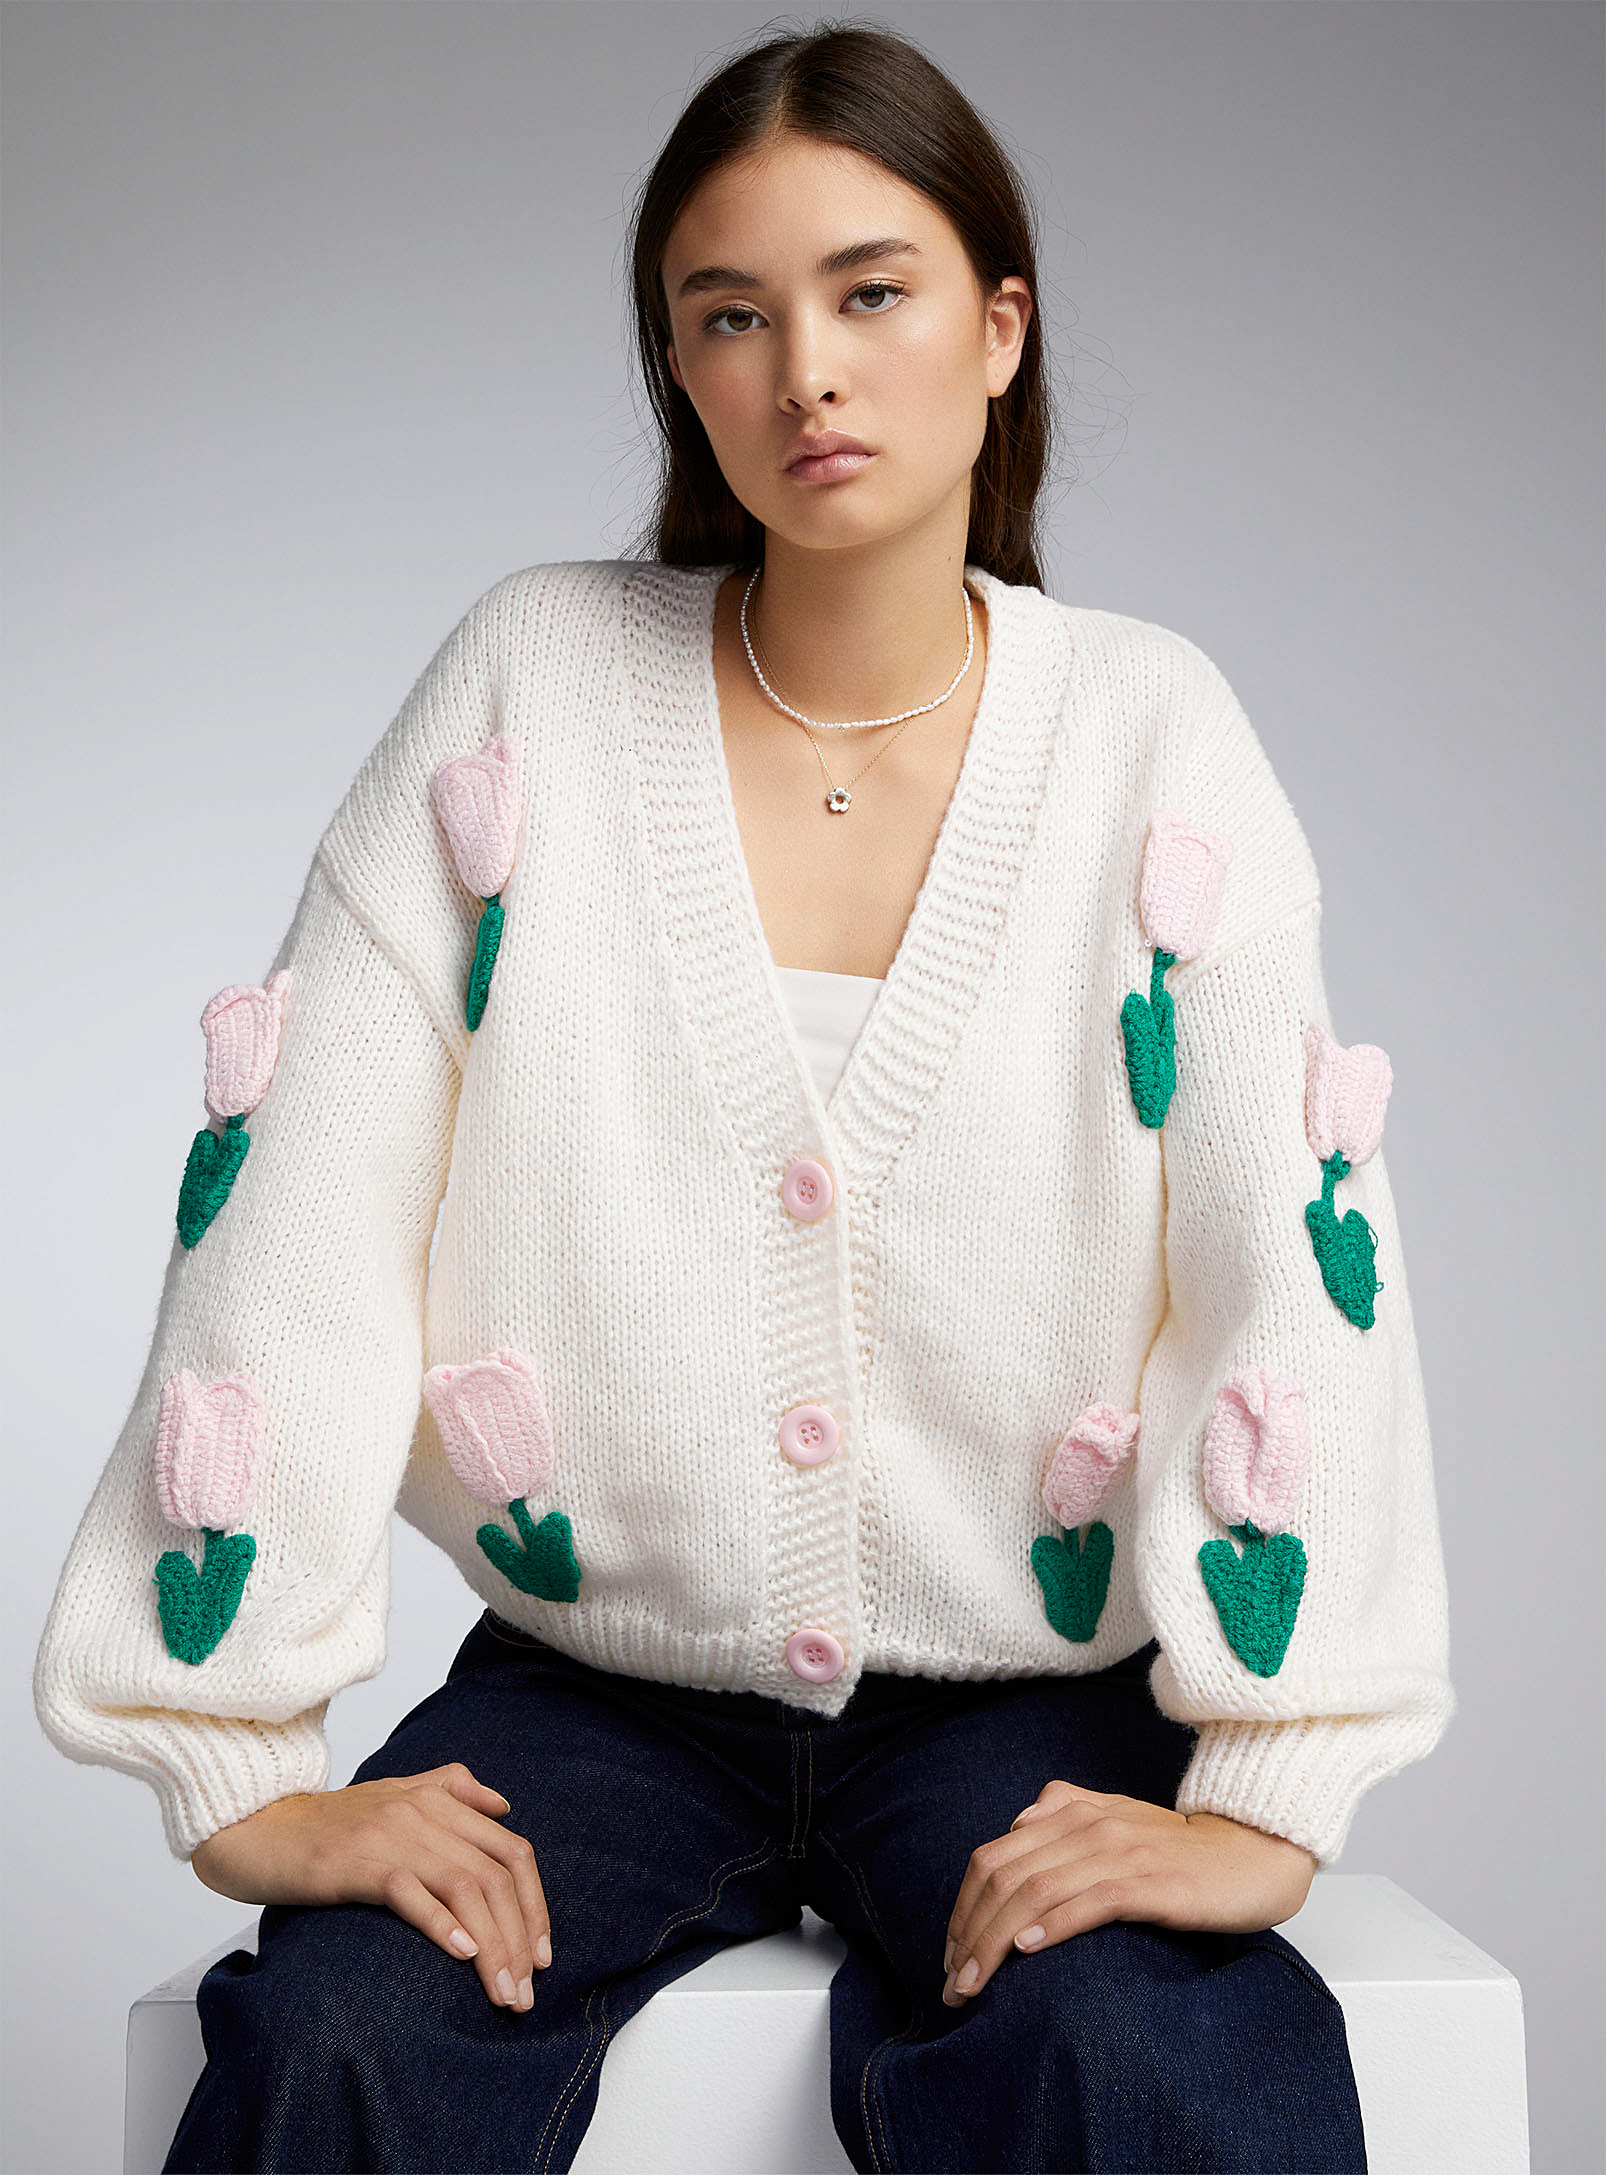 Twik Pink Tulips Cardigan In Patterned White